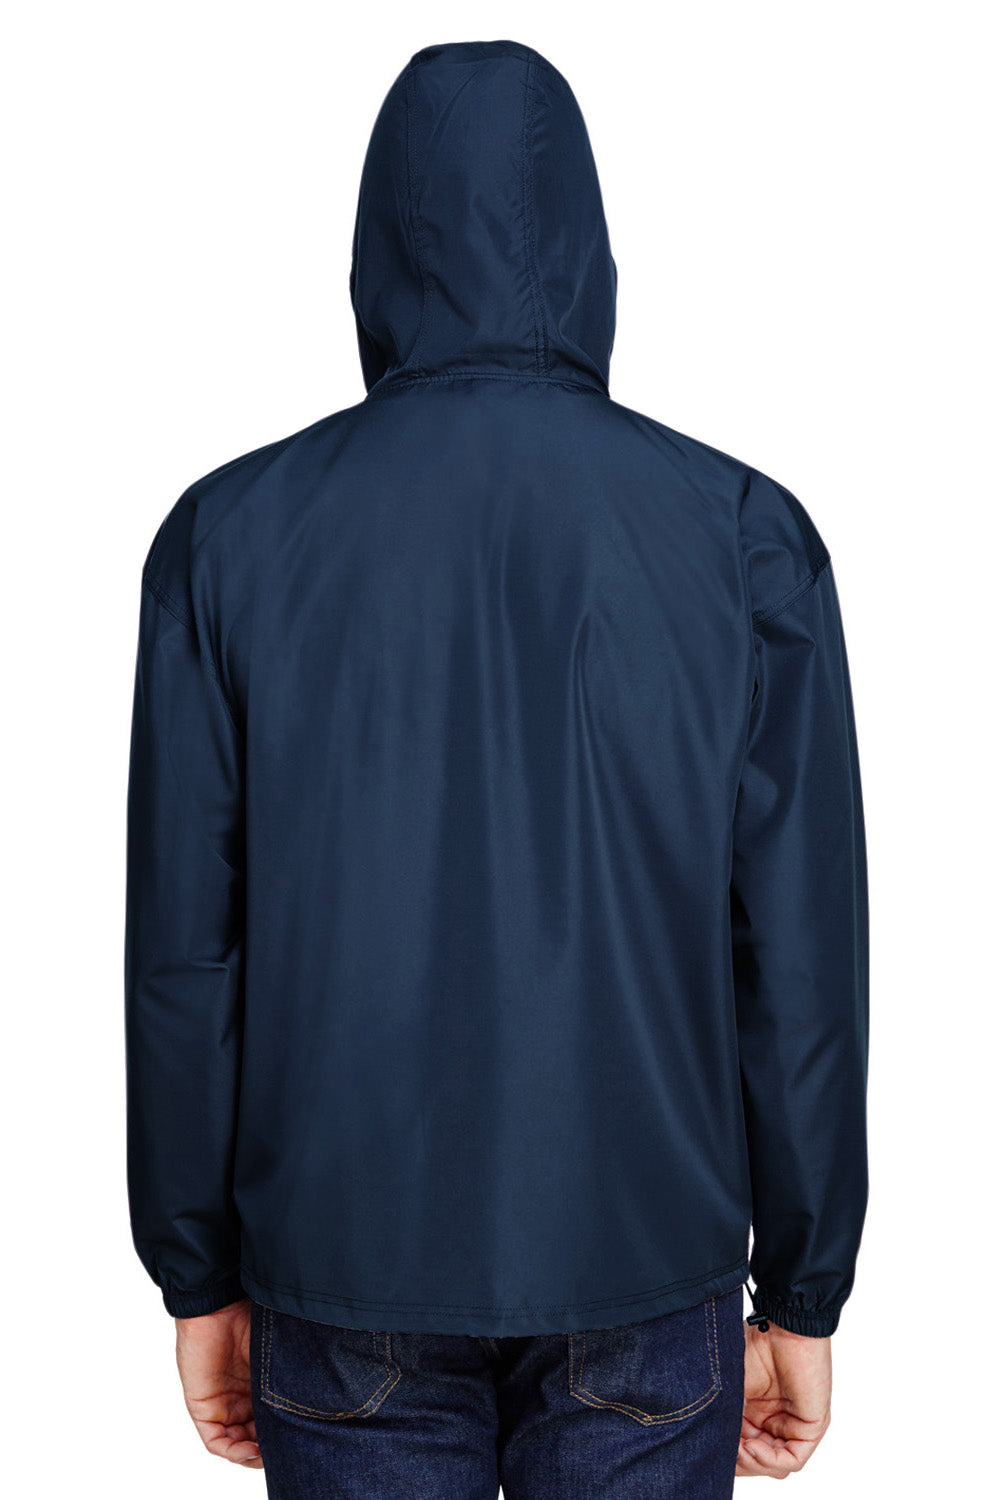 Champion CO200 Mens Packable Anorak 1/4 Zip Hooded Jacket Navy Blue Back